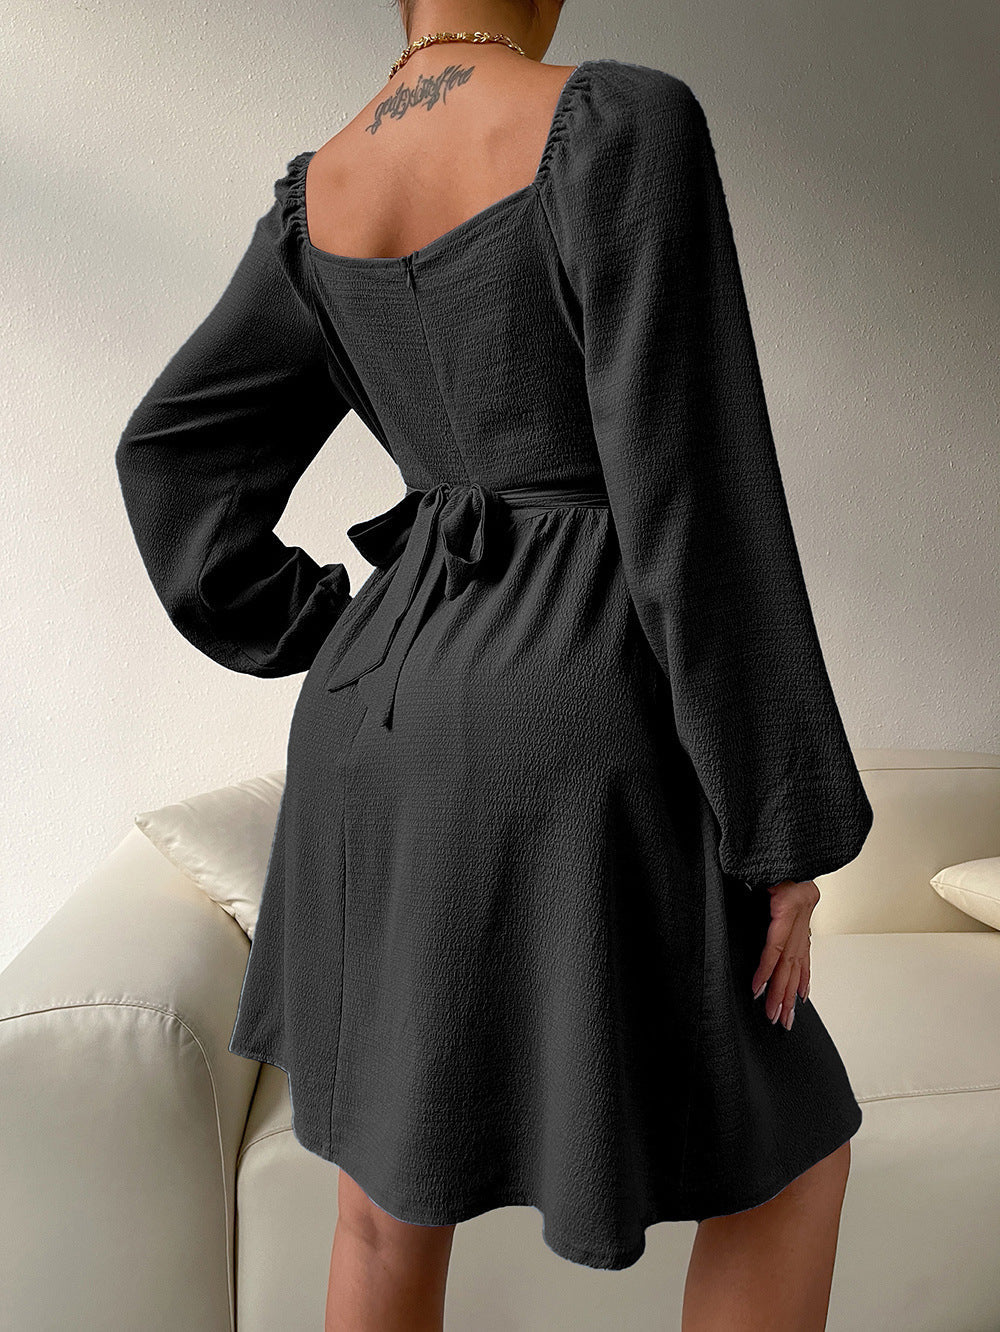 Casual Fall A Line Dresses for Women-Dresses-White-S-Free Shipping Leatheretro